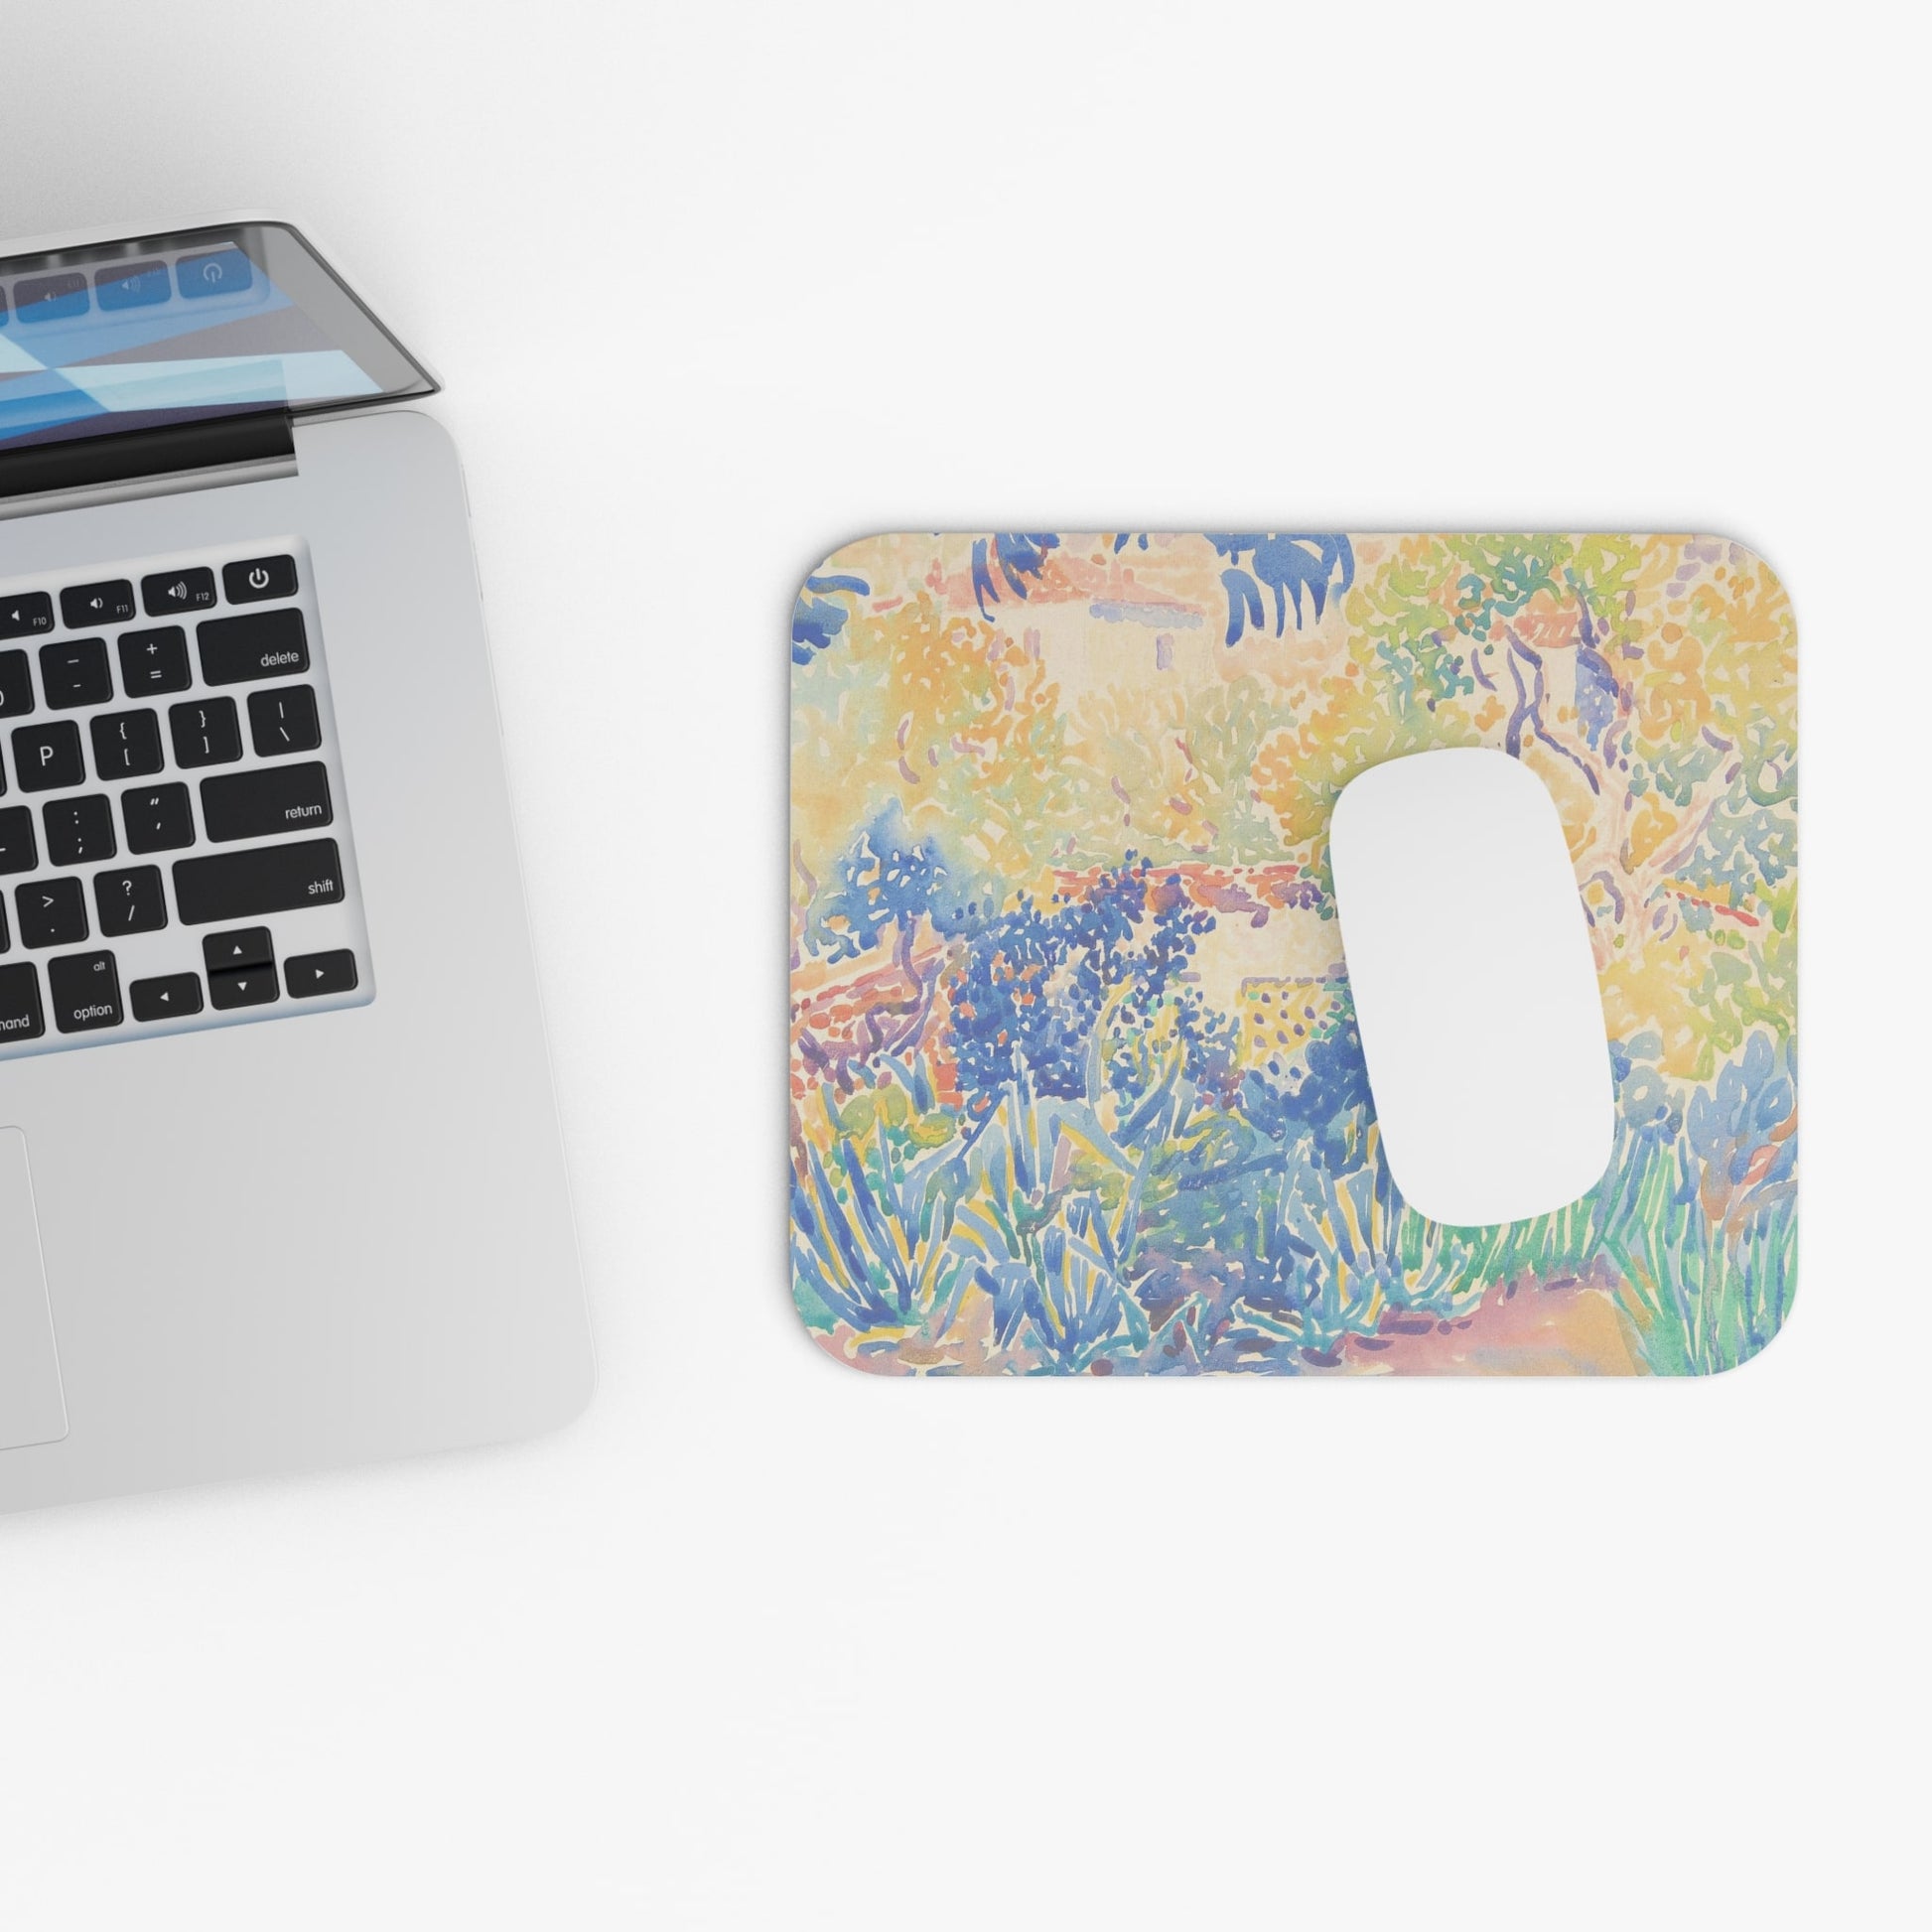 Vintage Colorful Nature Design Laptop Mouse Pad with White Mouse